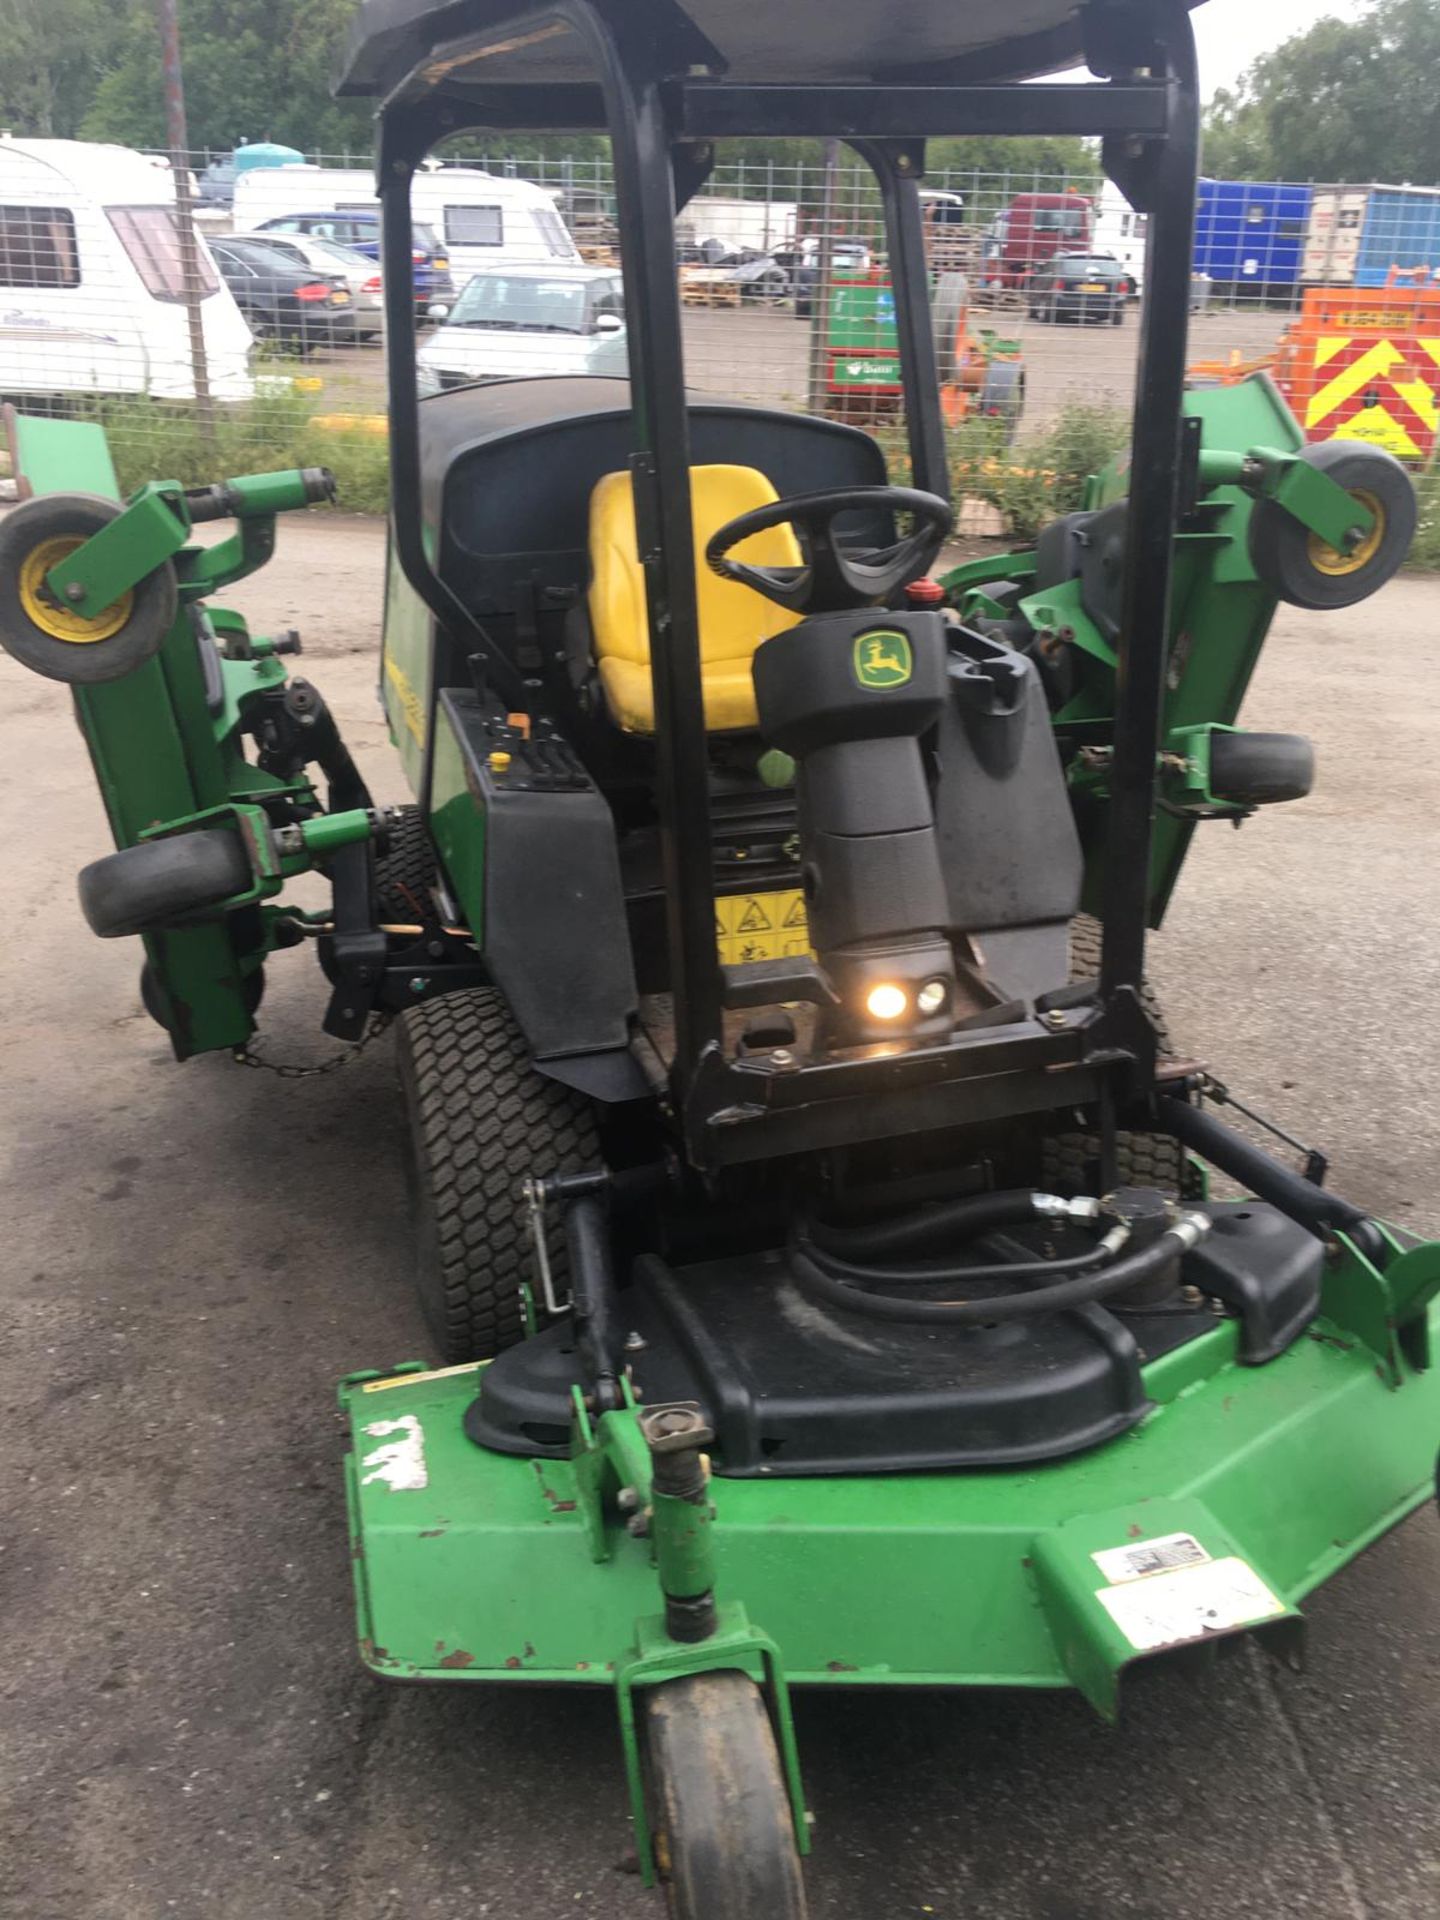 JOHN DEERE 1600 WIDE AREA TURBO BATWING RIDE ON LAWN MOWER, CRUISE CONTROL, RUNS & WORKS *NO VAT* - Image 2 of 24